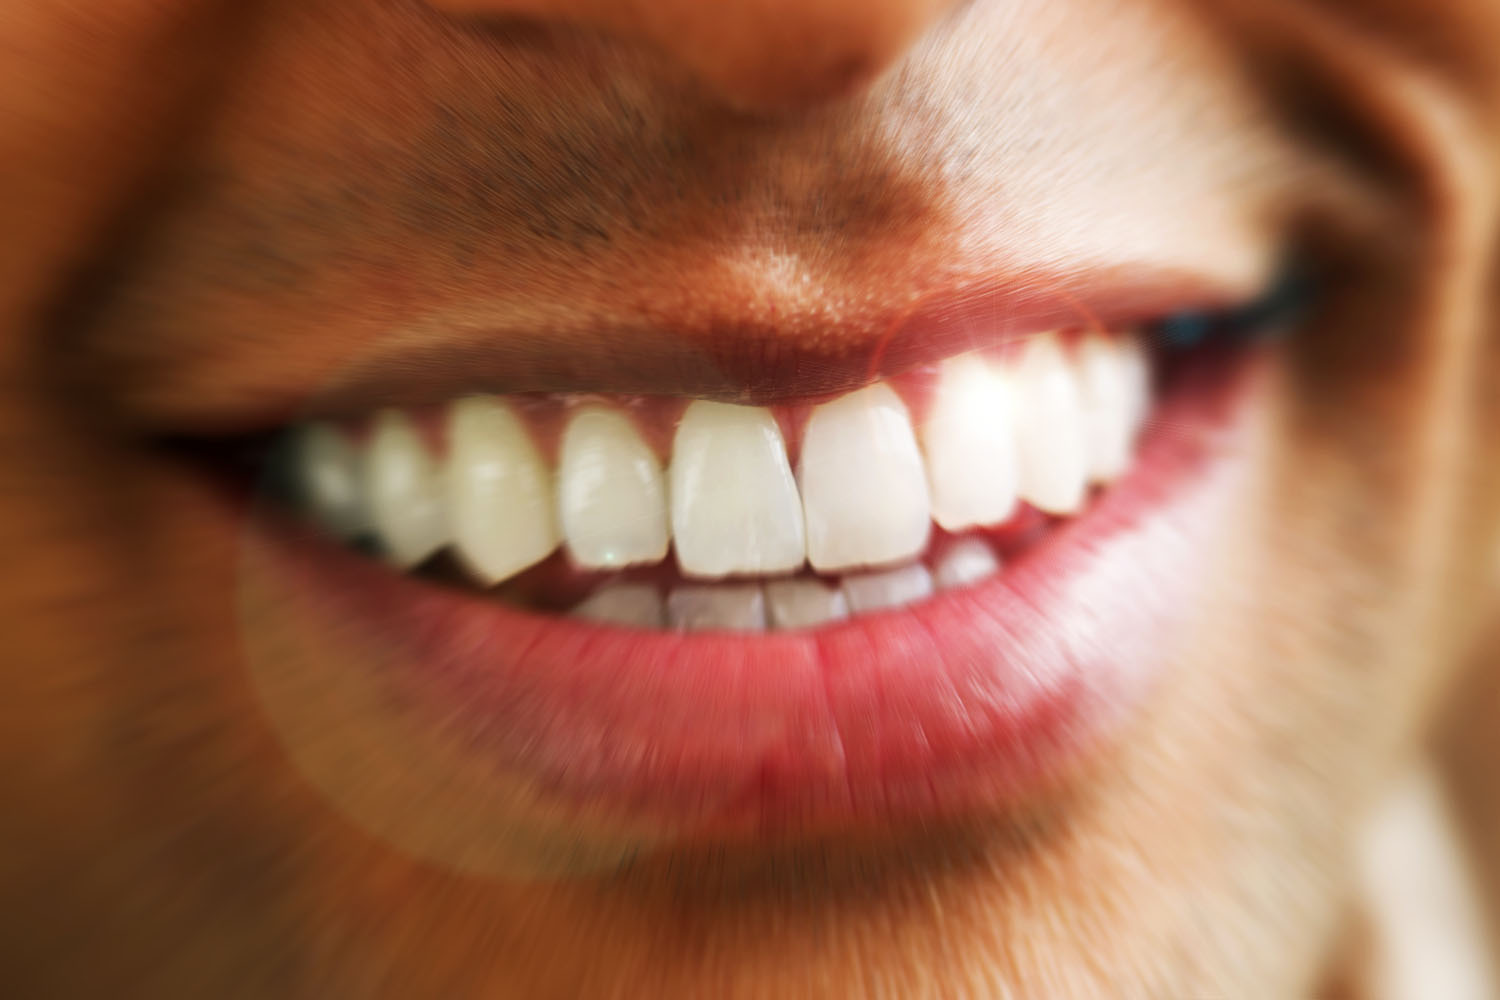 Do Any At-Home Teeth-Whitening Products Actually Work? A Dentist Weighs In.